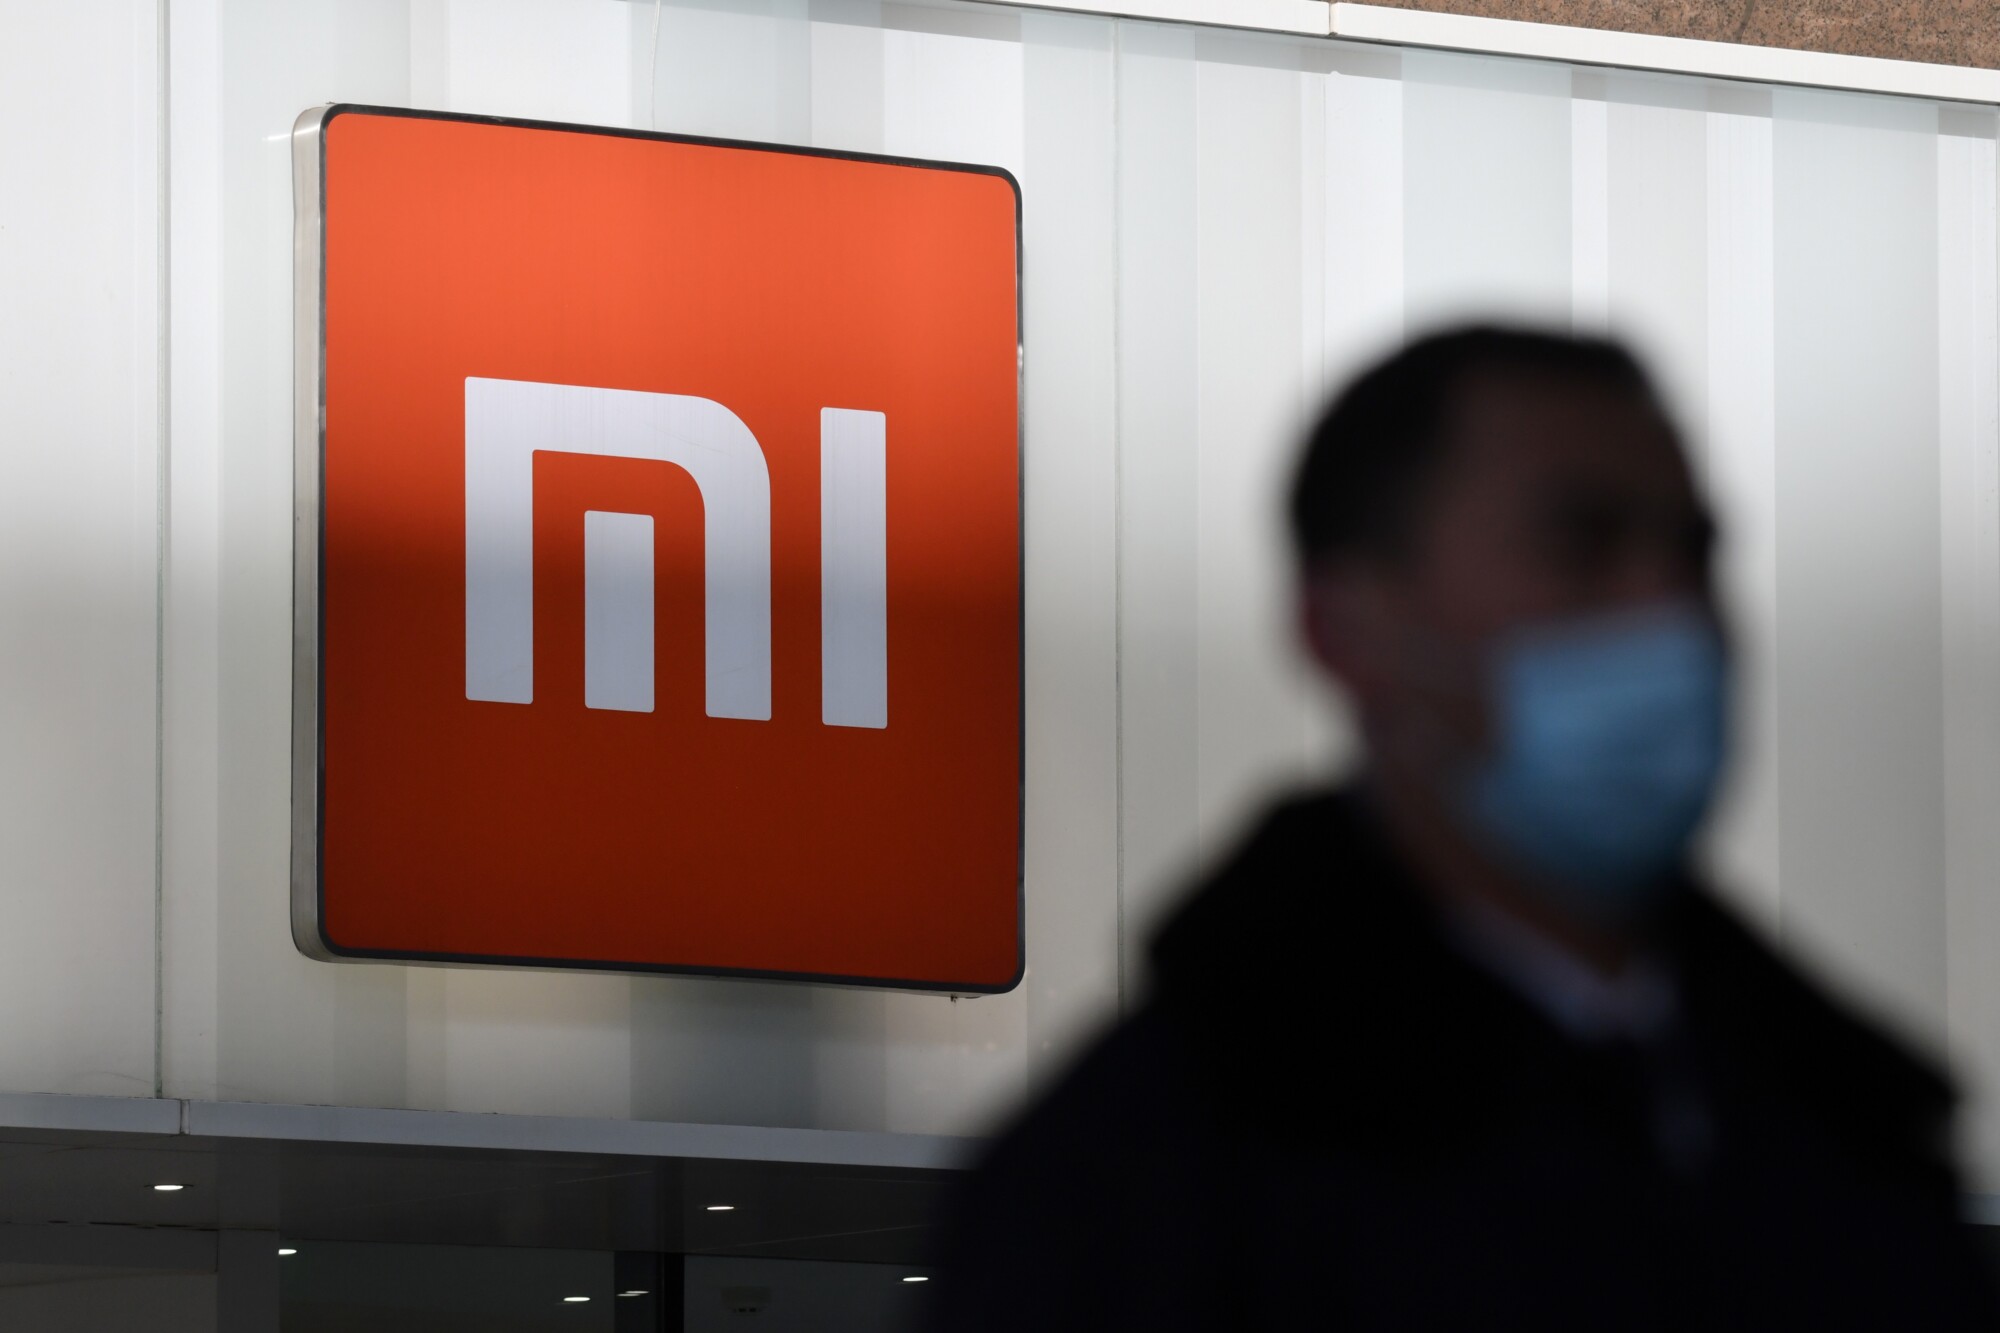 Court Ruling Suspends US Ban on Investment in Xiaomi